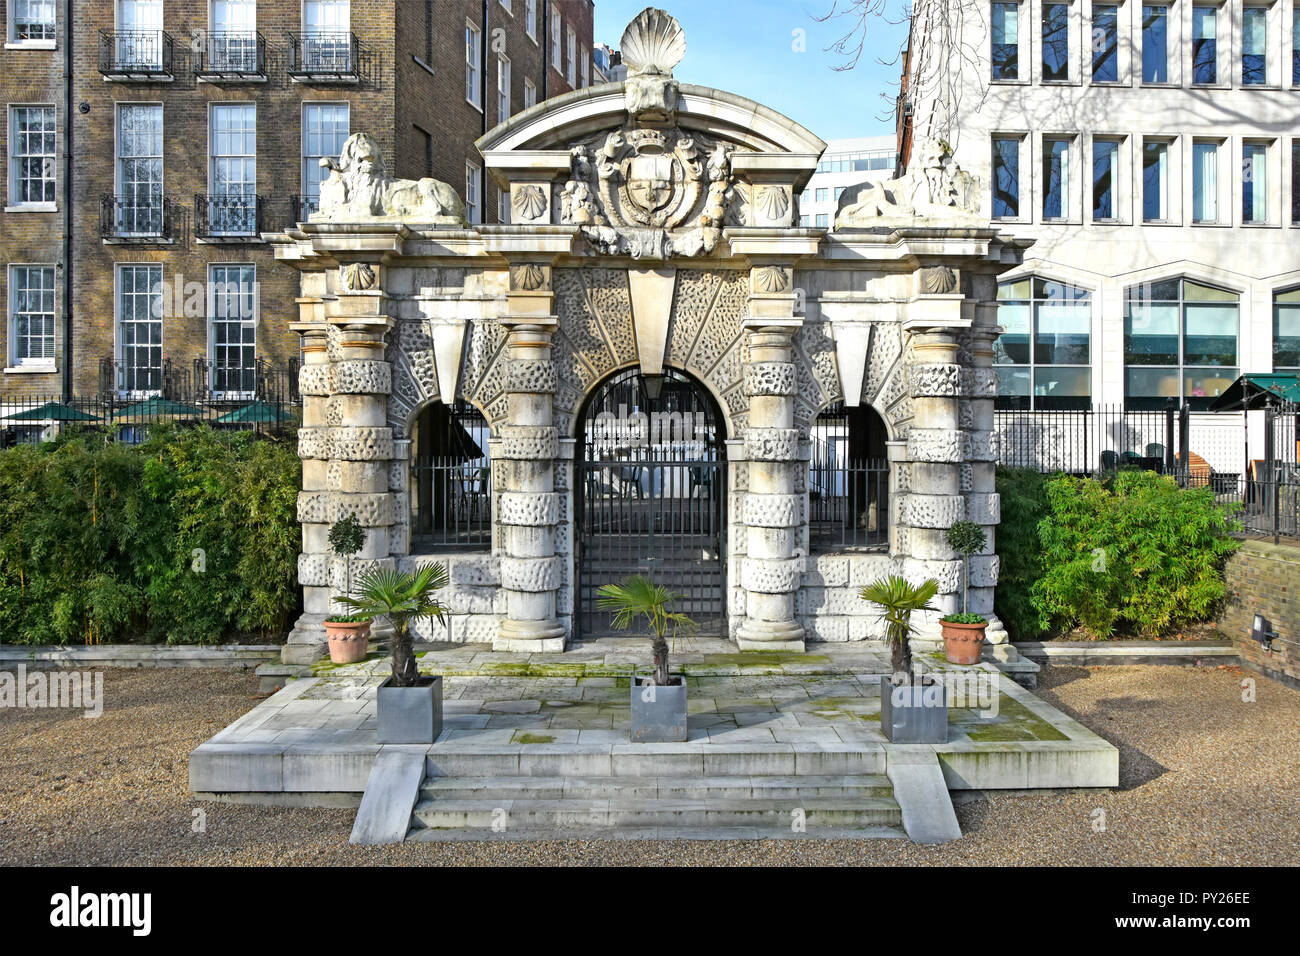 Winter view of the historical Italianate York Water Gate a Watergate that marks shoreline of River Thames before Victoria Embankment was built UK Stock Photo